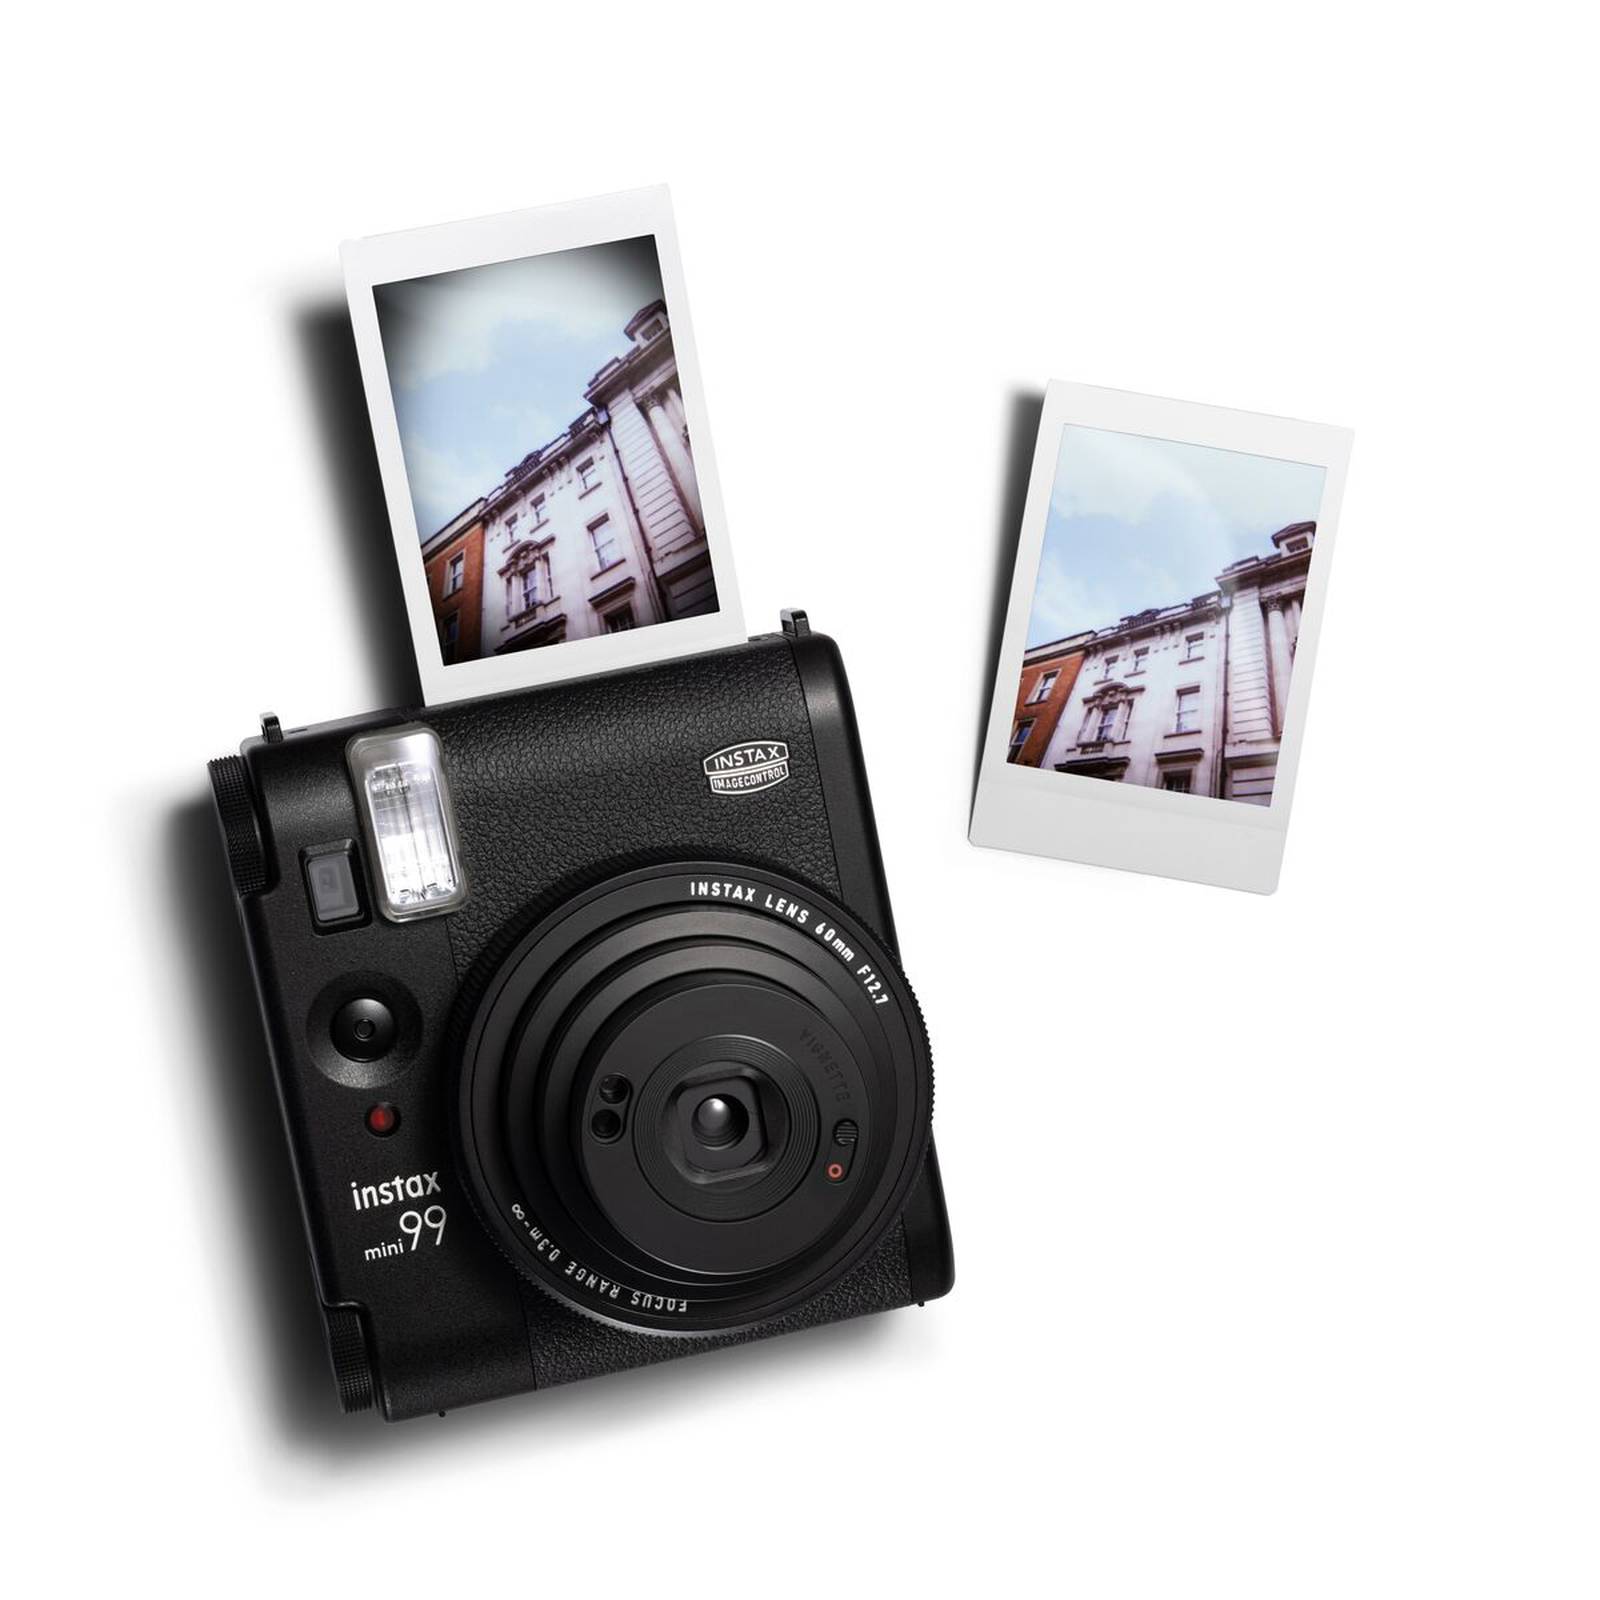 A black, old-style instant camera with a photograph being produced from the top of the device.